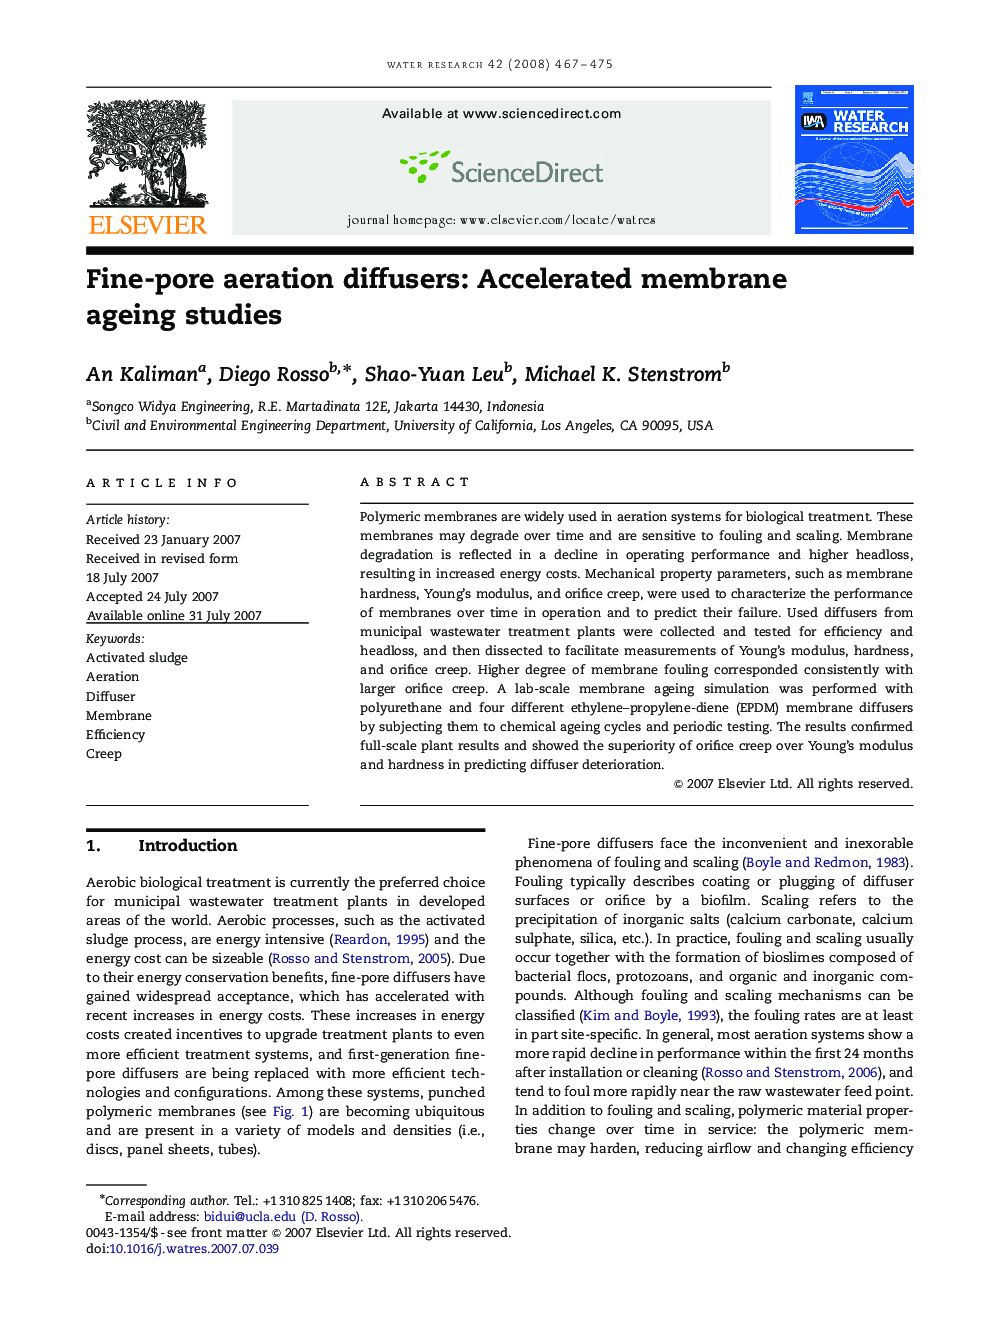 Fine-pore aeration diffusers: Accelerated membrane ageing studies